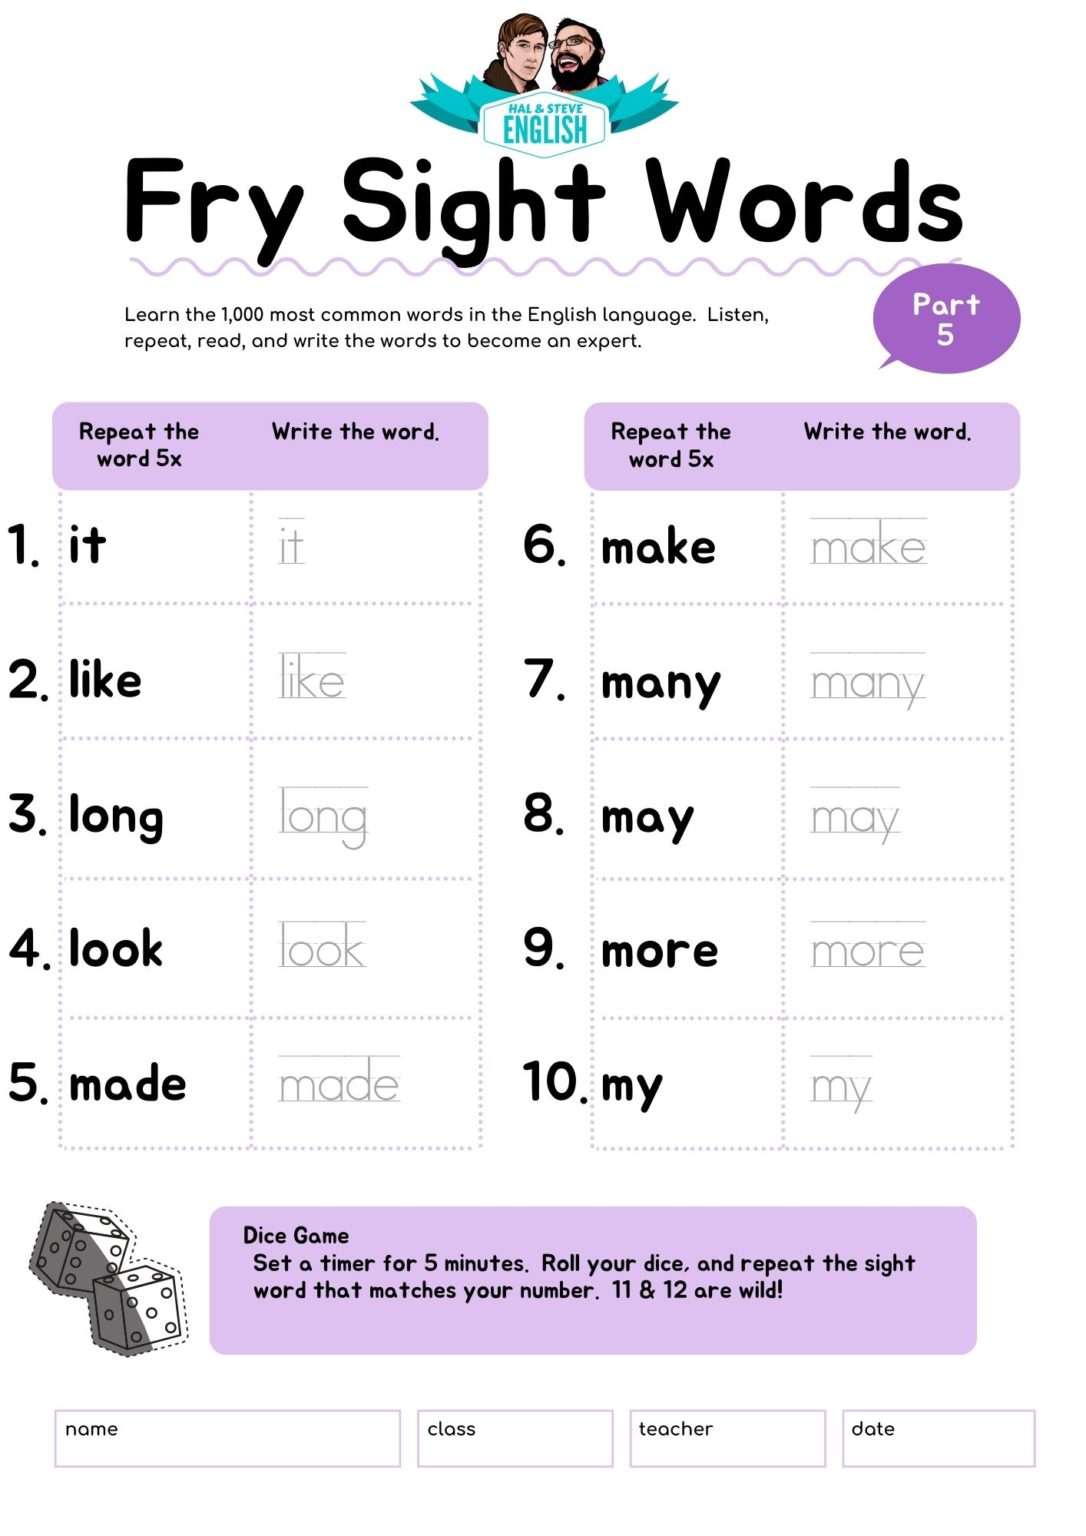 First 100 Fry Sight Words Games And Worksheets Pre A1 Hal And Steve